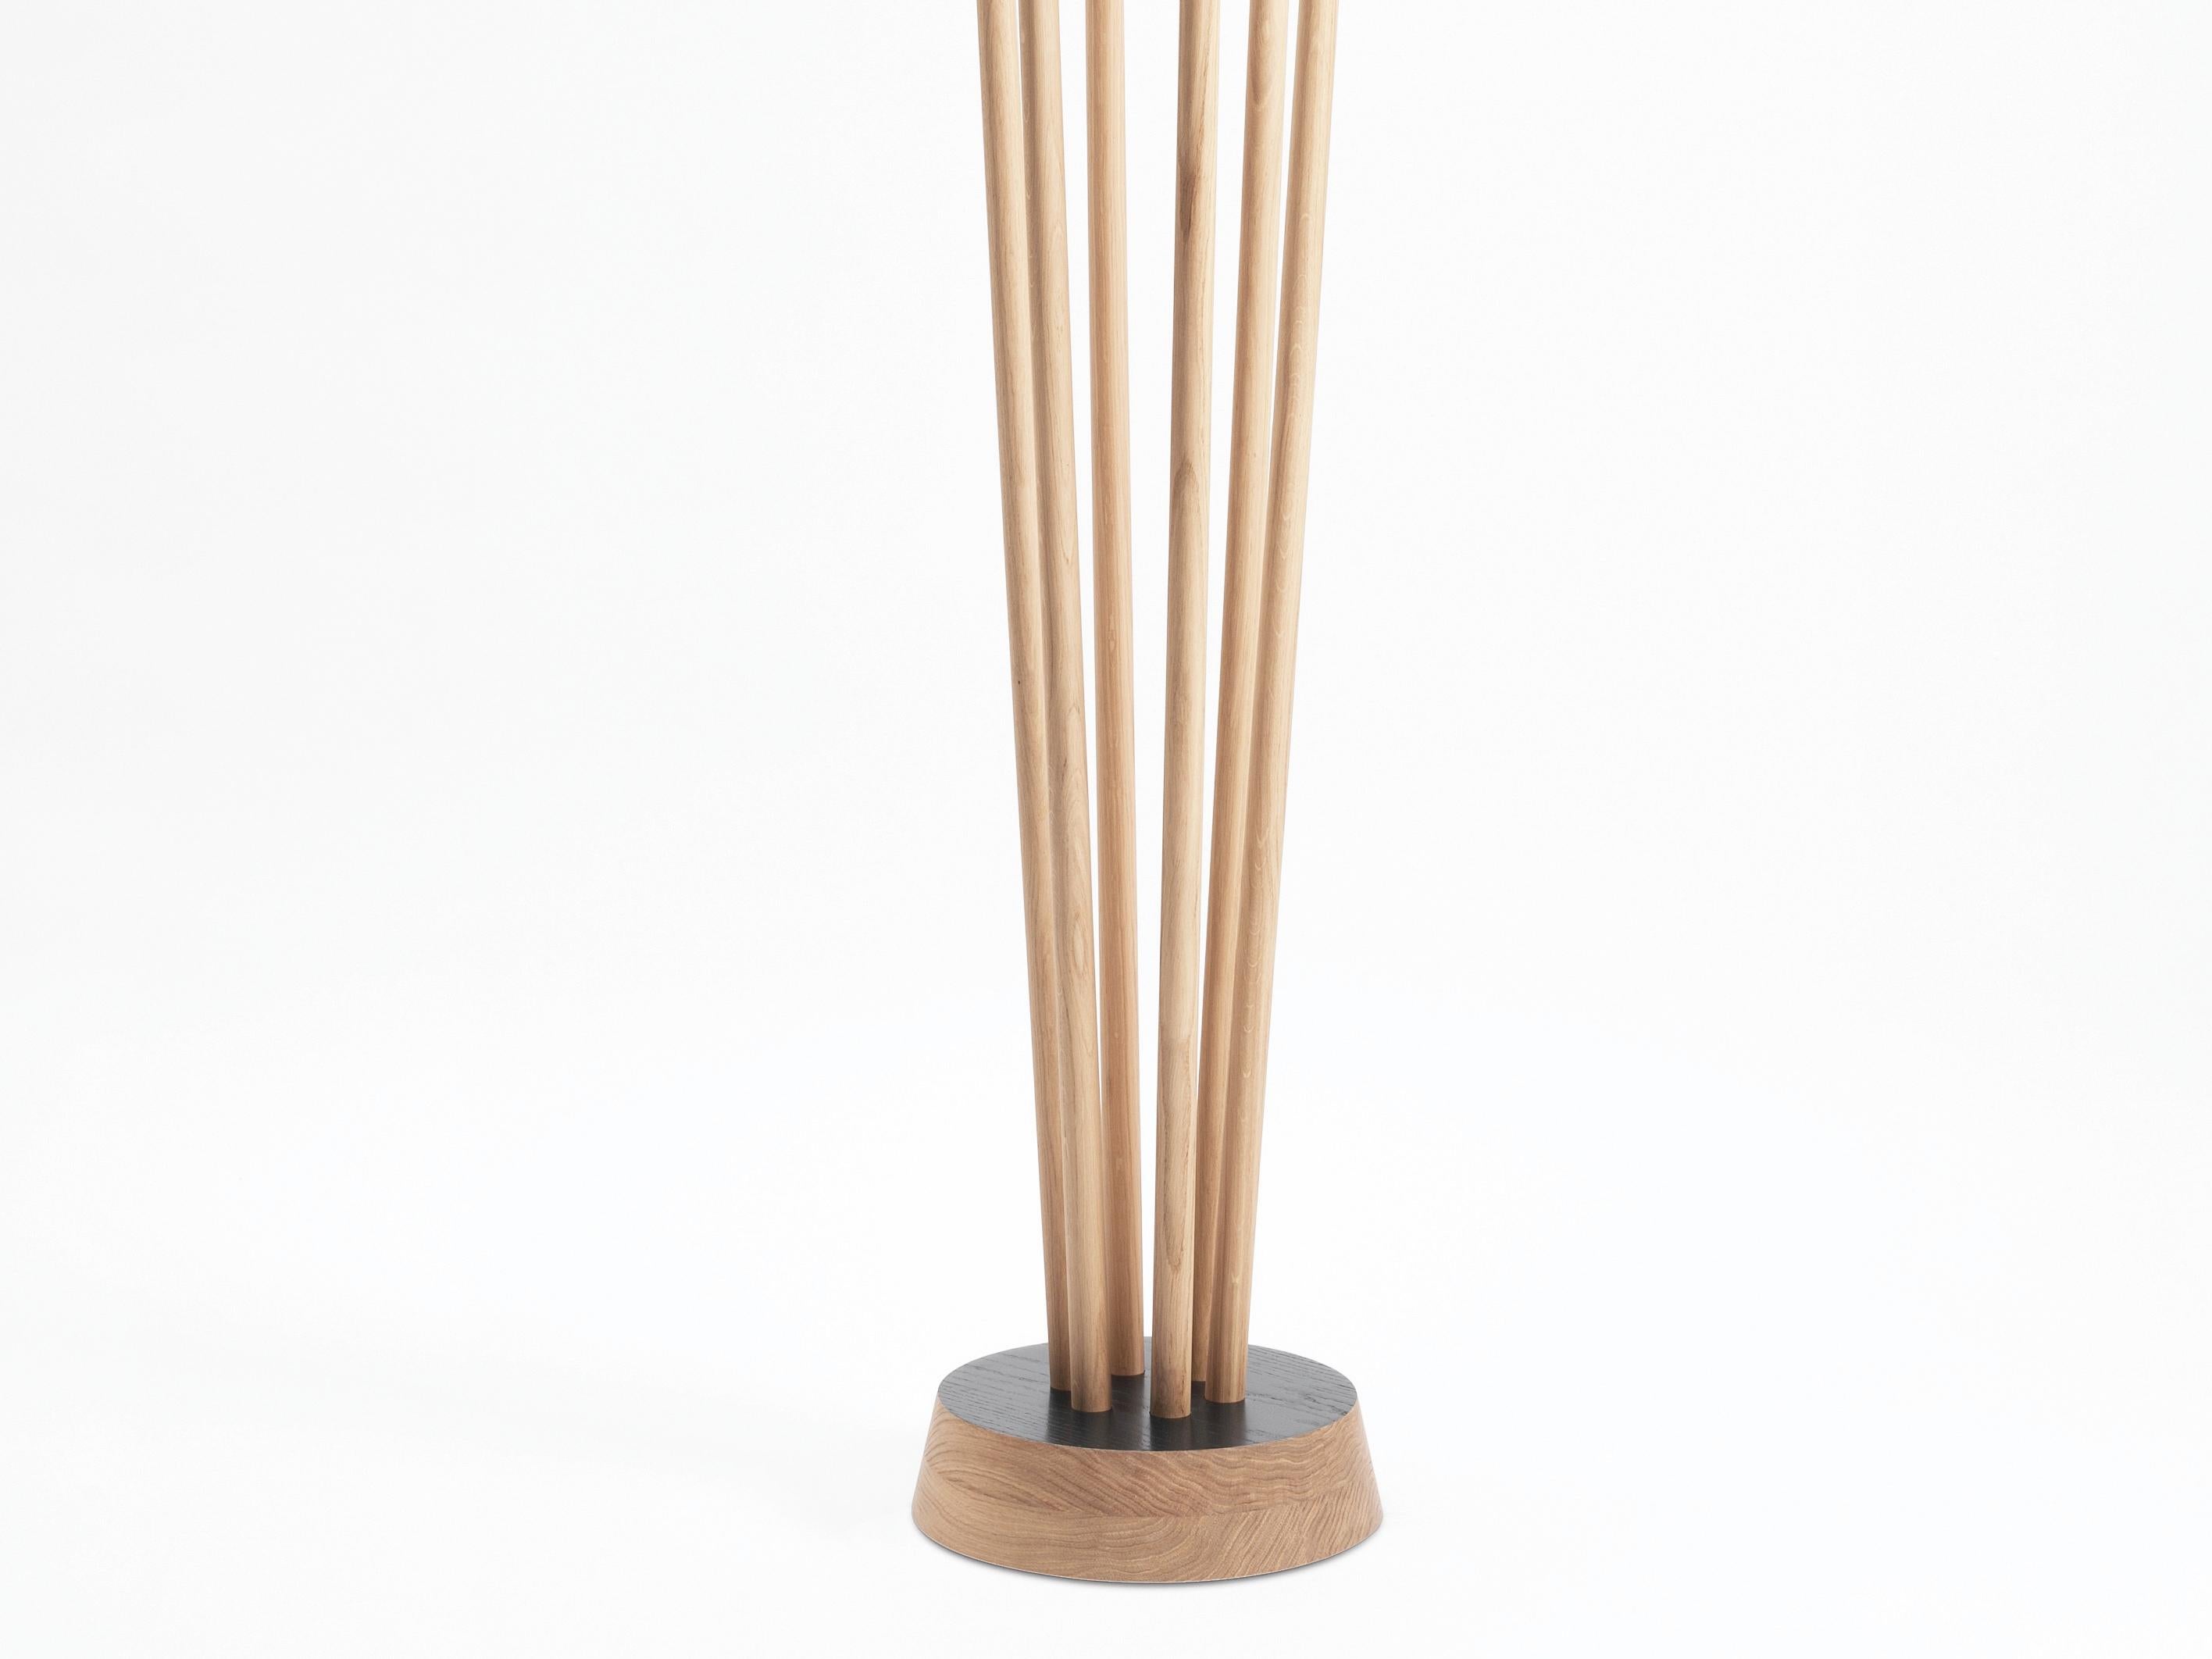 Strongly anchored in a solid wood base, offering different levels, the 6 masts of the Spirale coat rack create an elegant and quirky figure. More than just a coat rack it is a decorative sculpture for an entrance, a hall.
The color of the base can